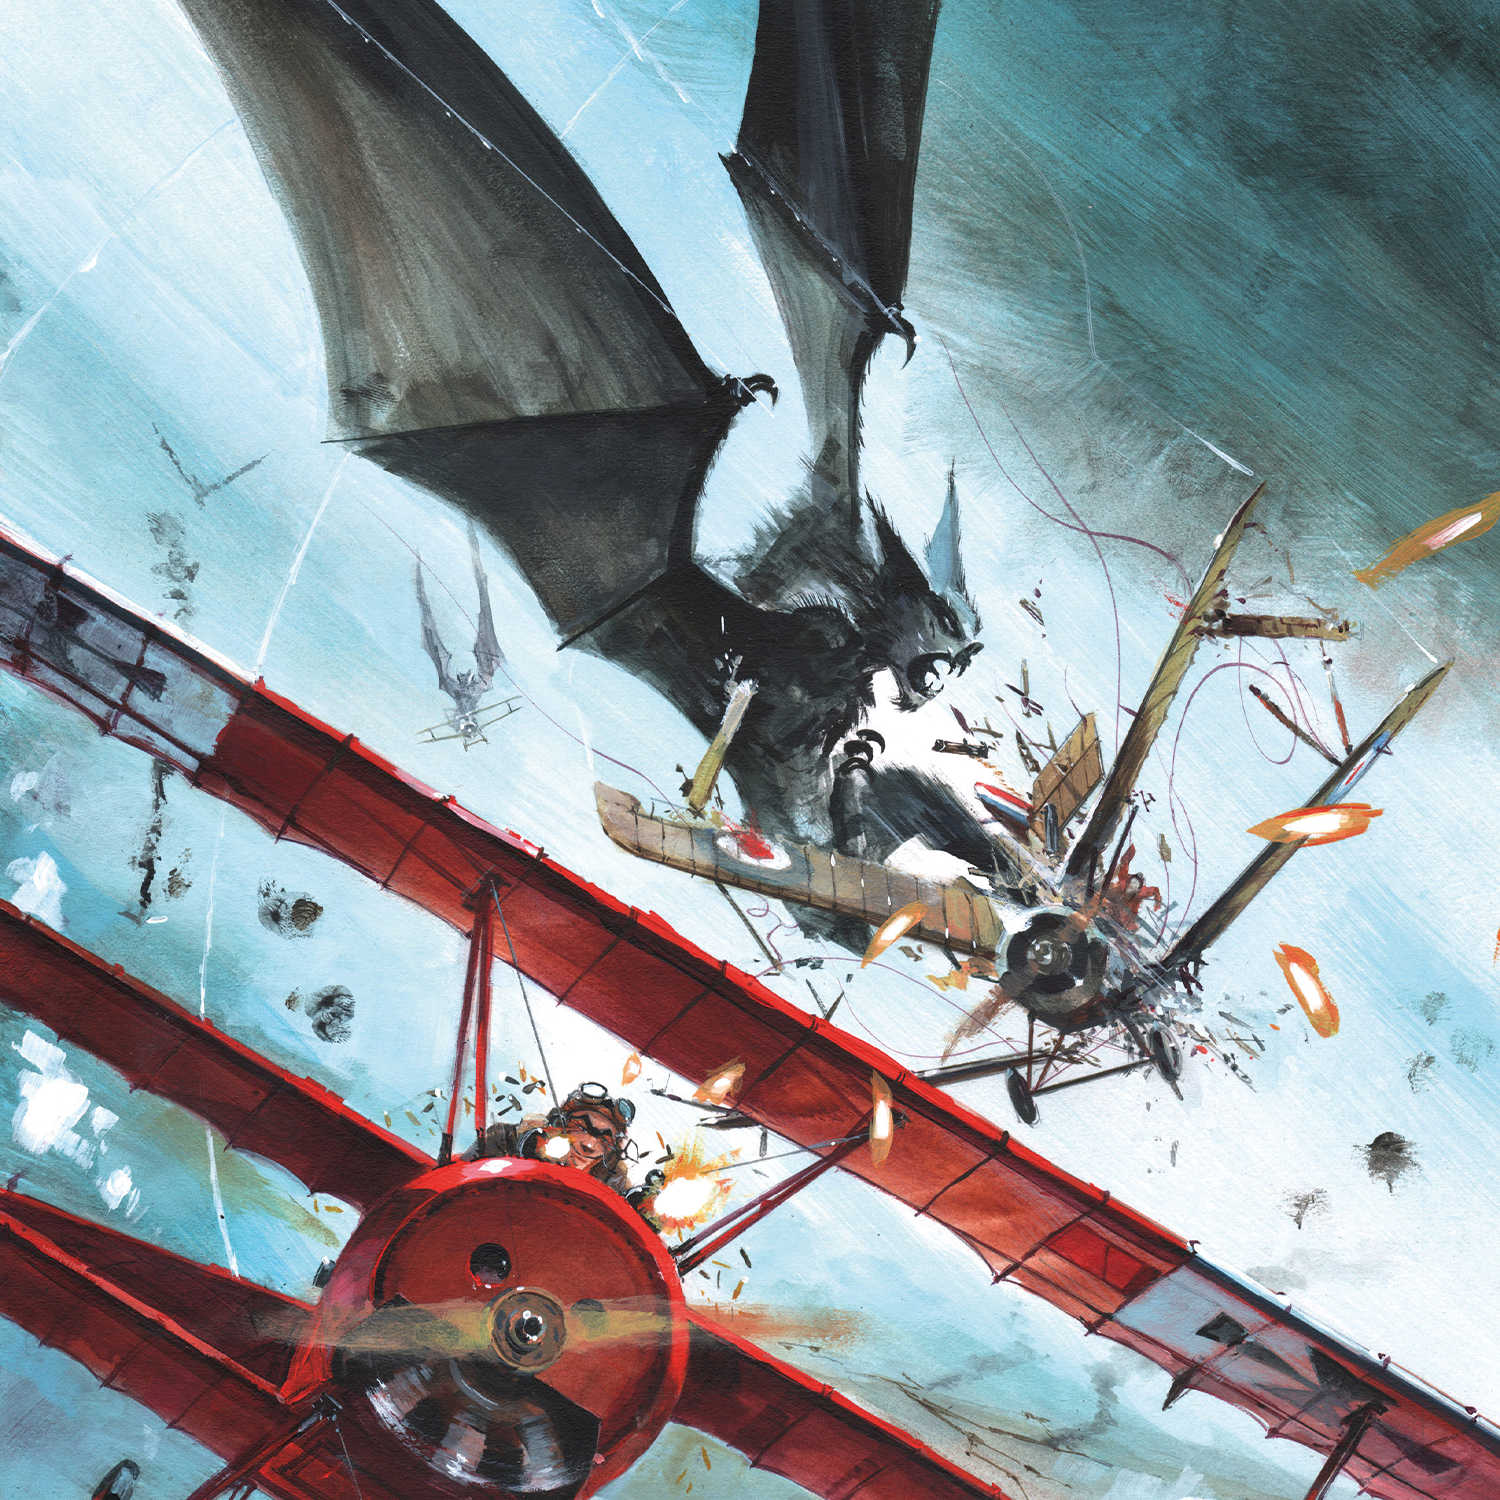 Out Today! There’s Giant Bats and Dogfights in Black Max Vol.3!